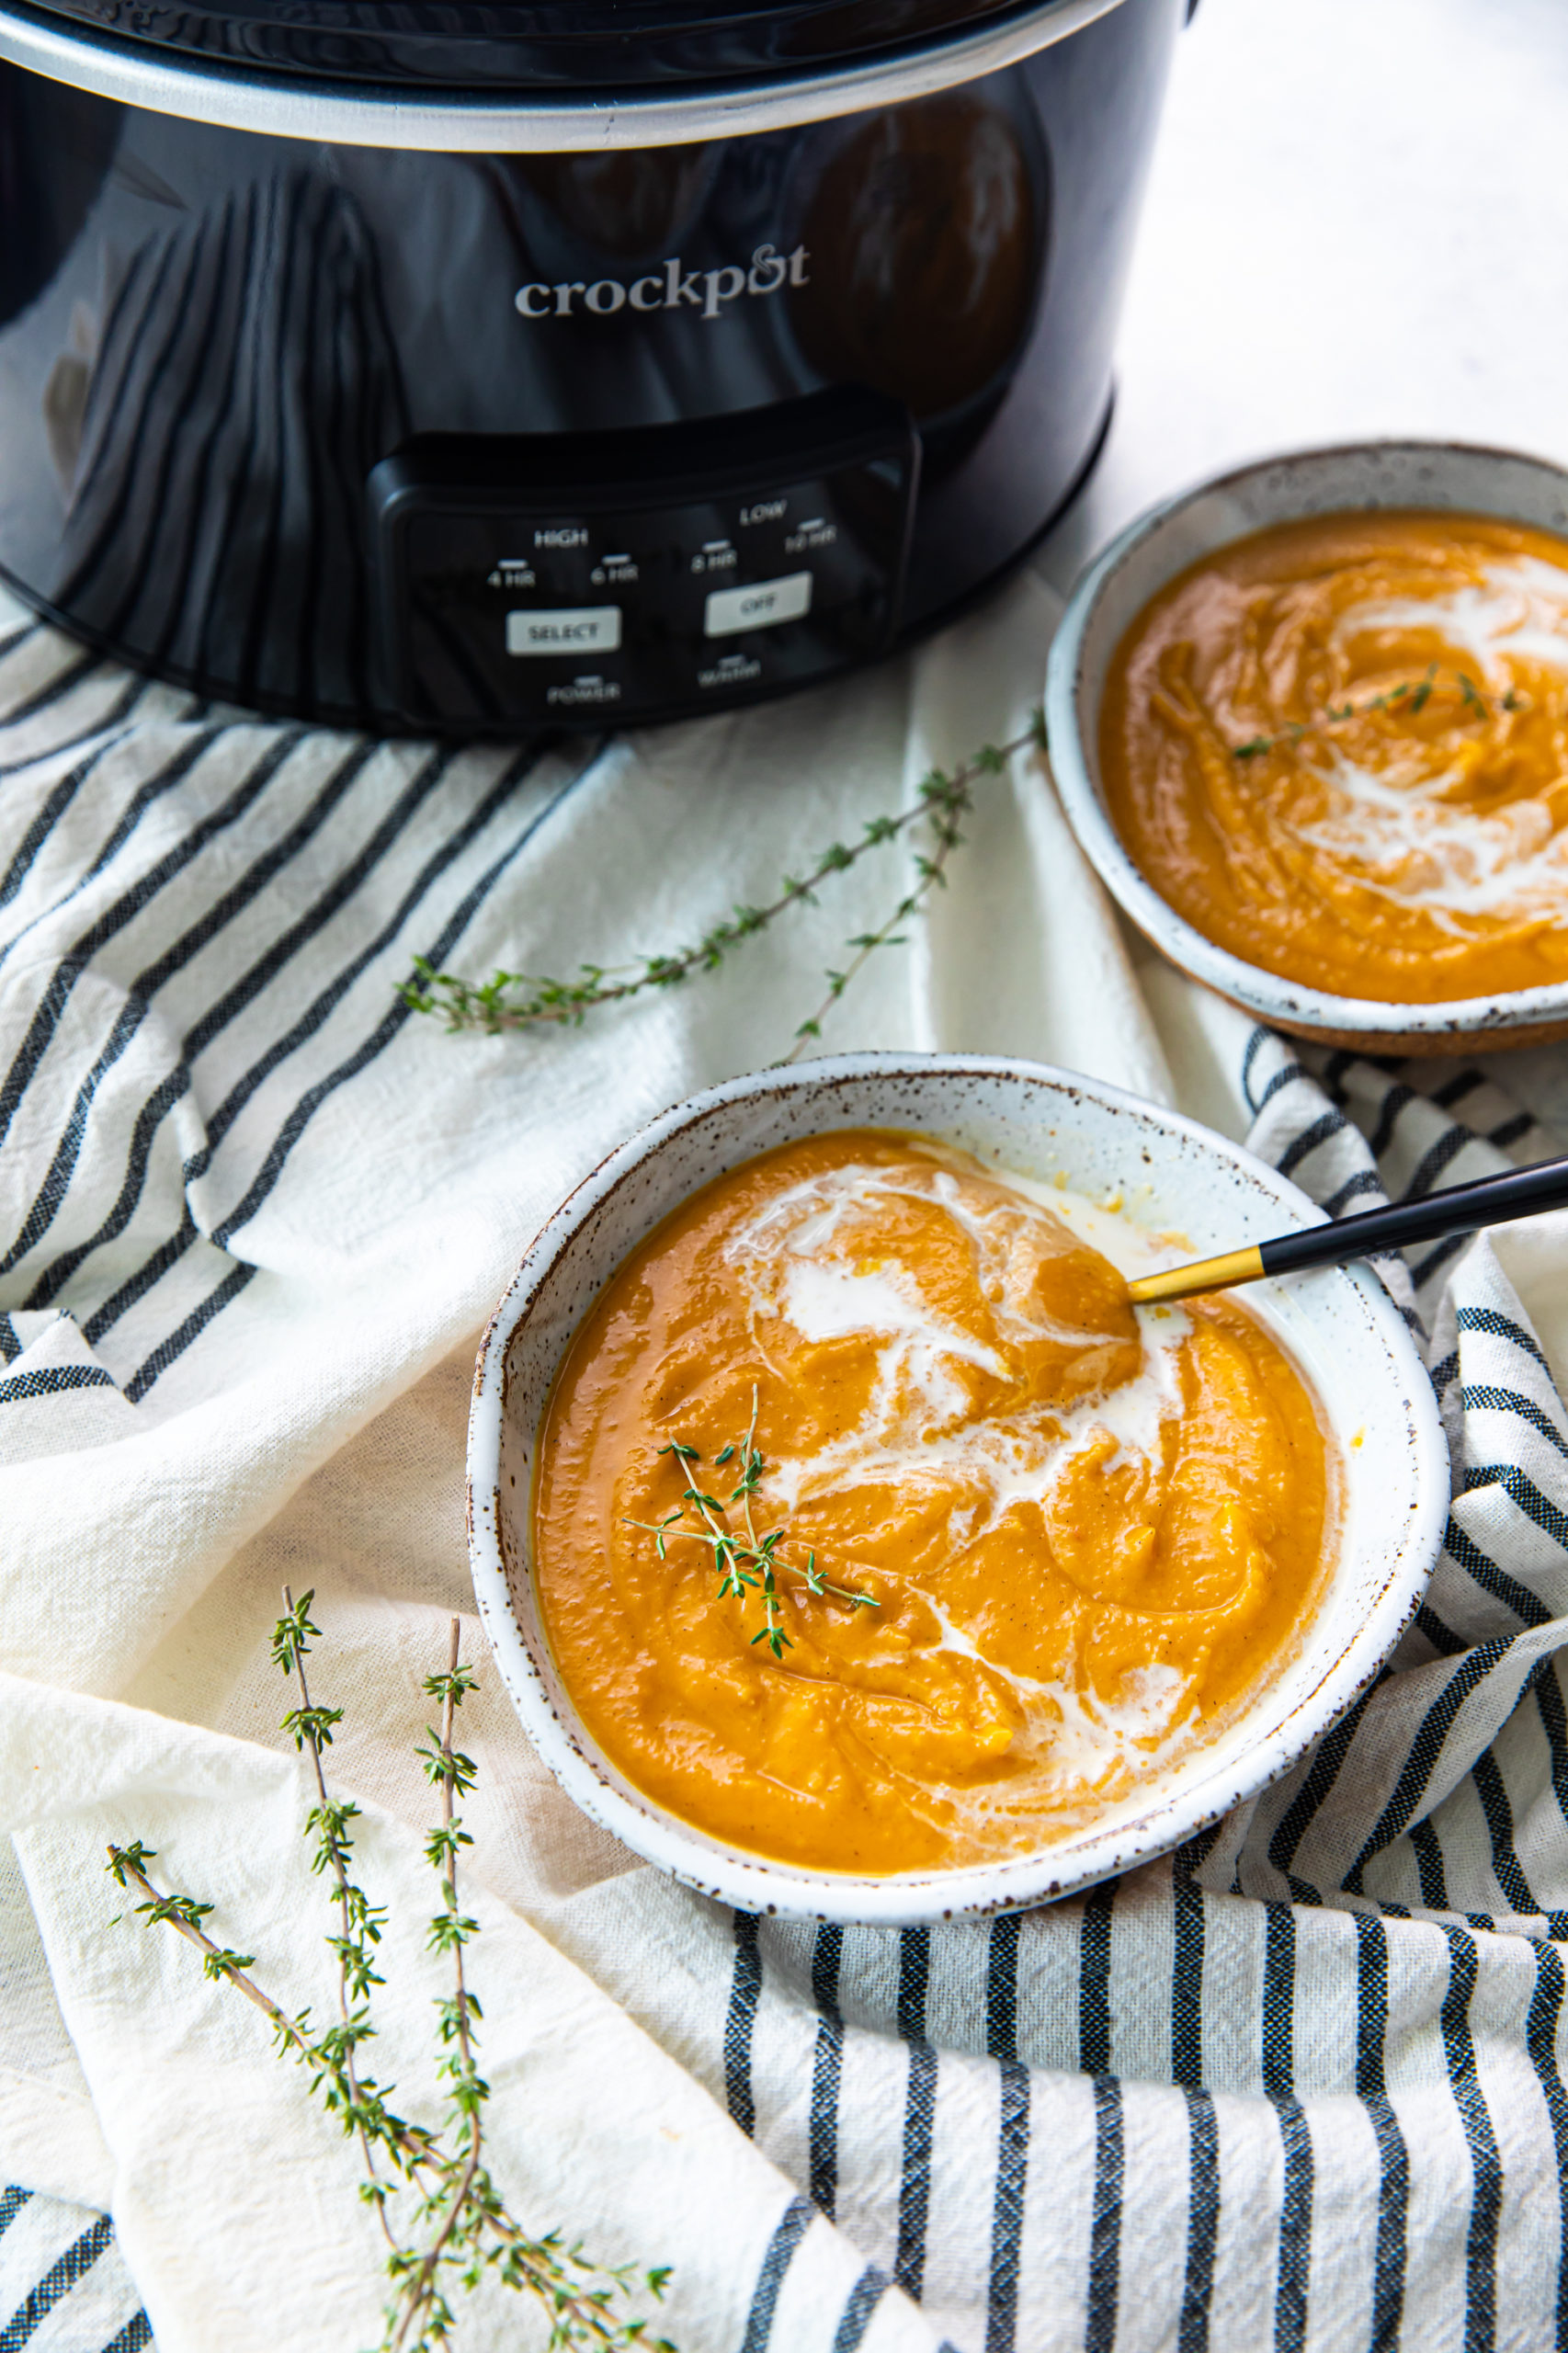 A bowl of pumpkin soup with a spoon in it, on top of a kitchen towel, next to thyme sprigs, a slow cooker, and another bowl of soup